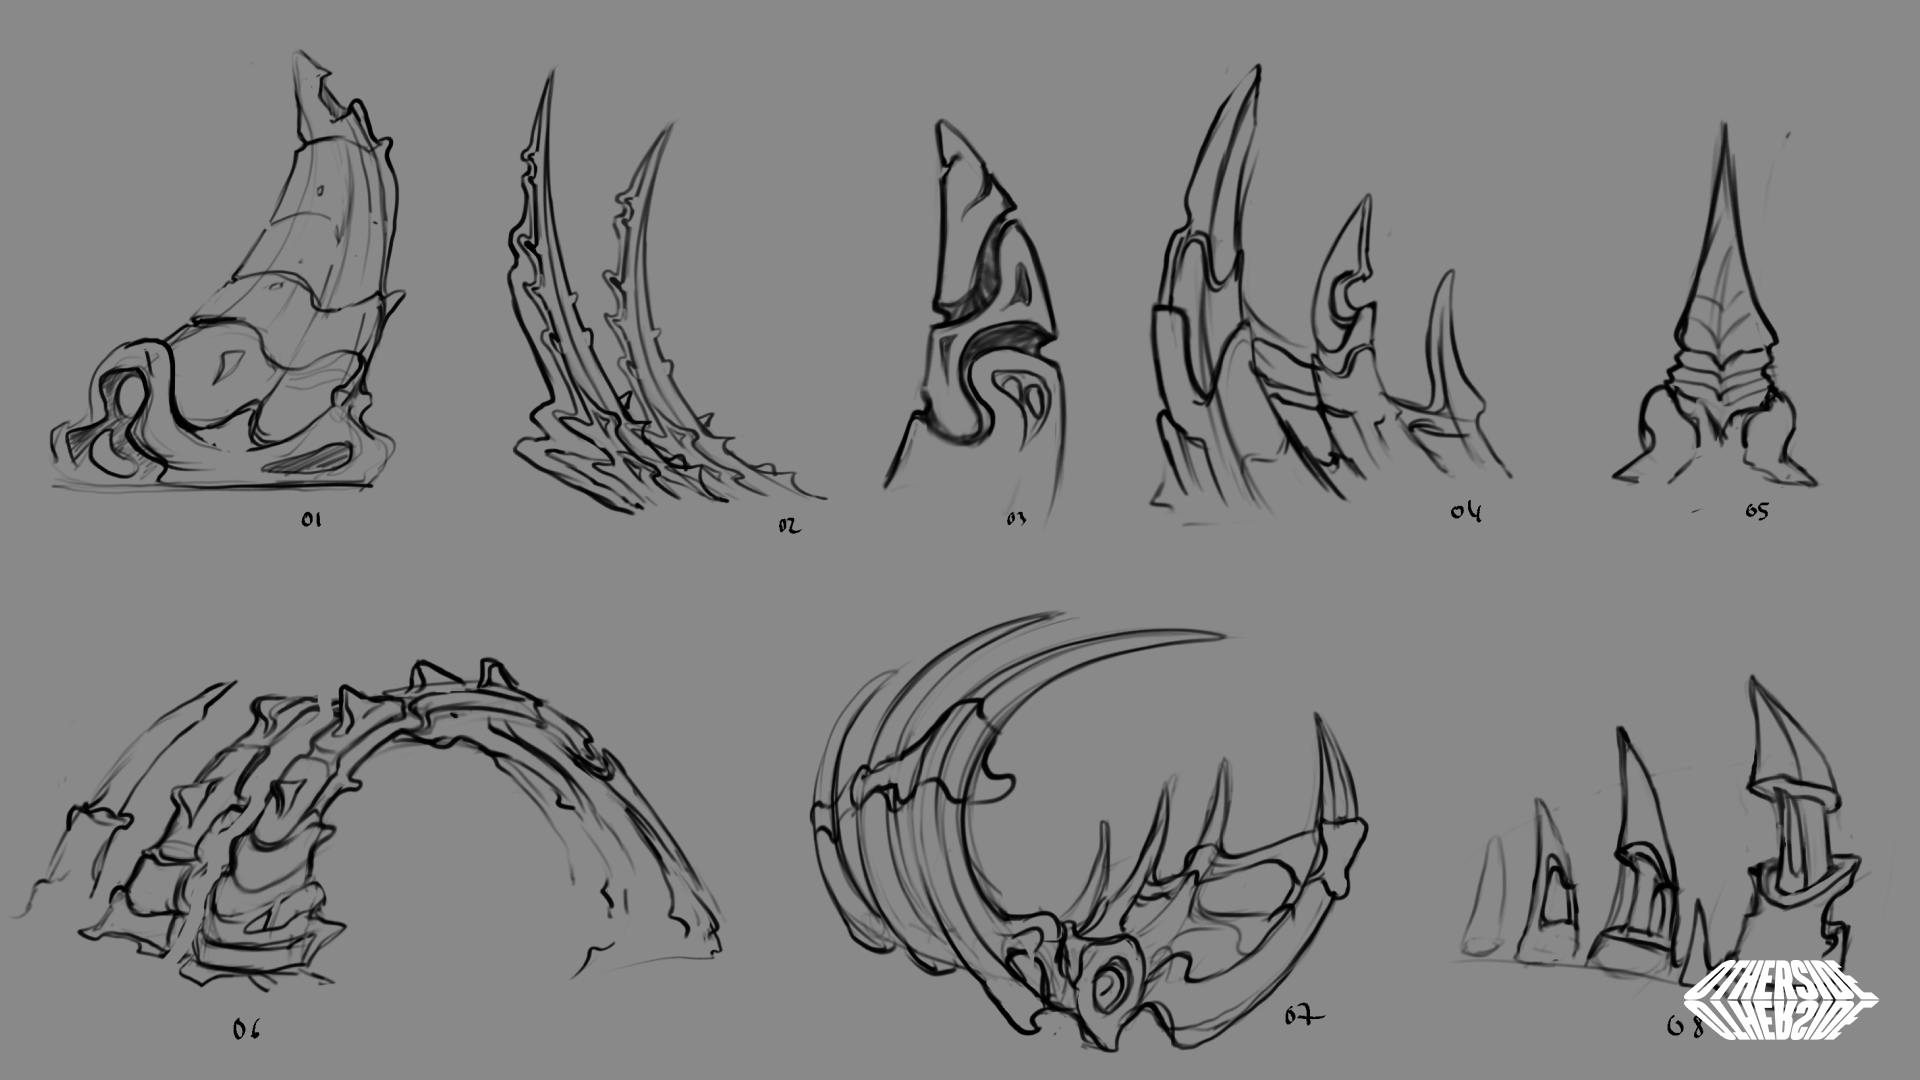 Sketches of hero assets that are prominent features of the Bone environment. 